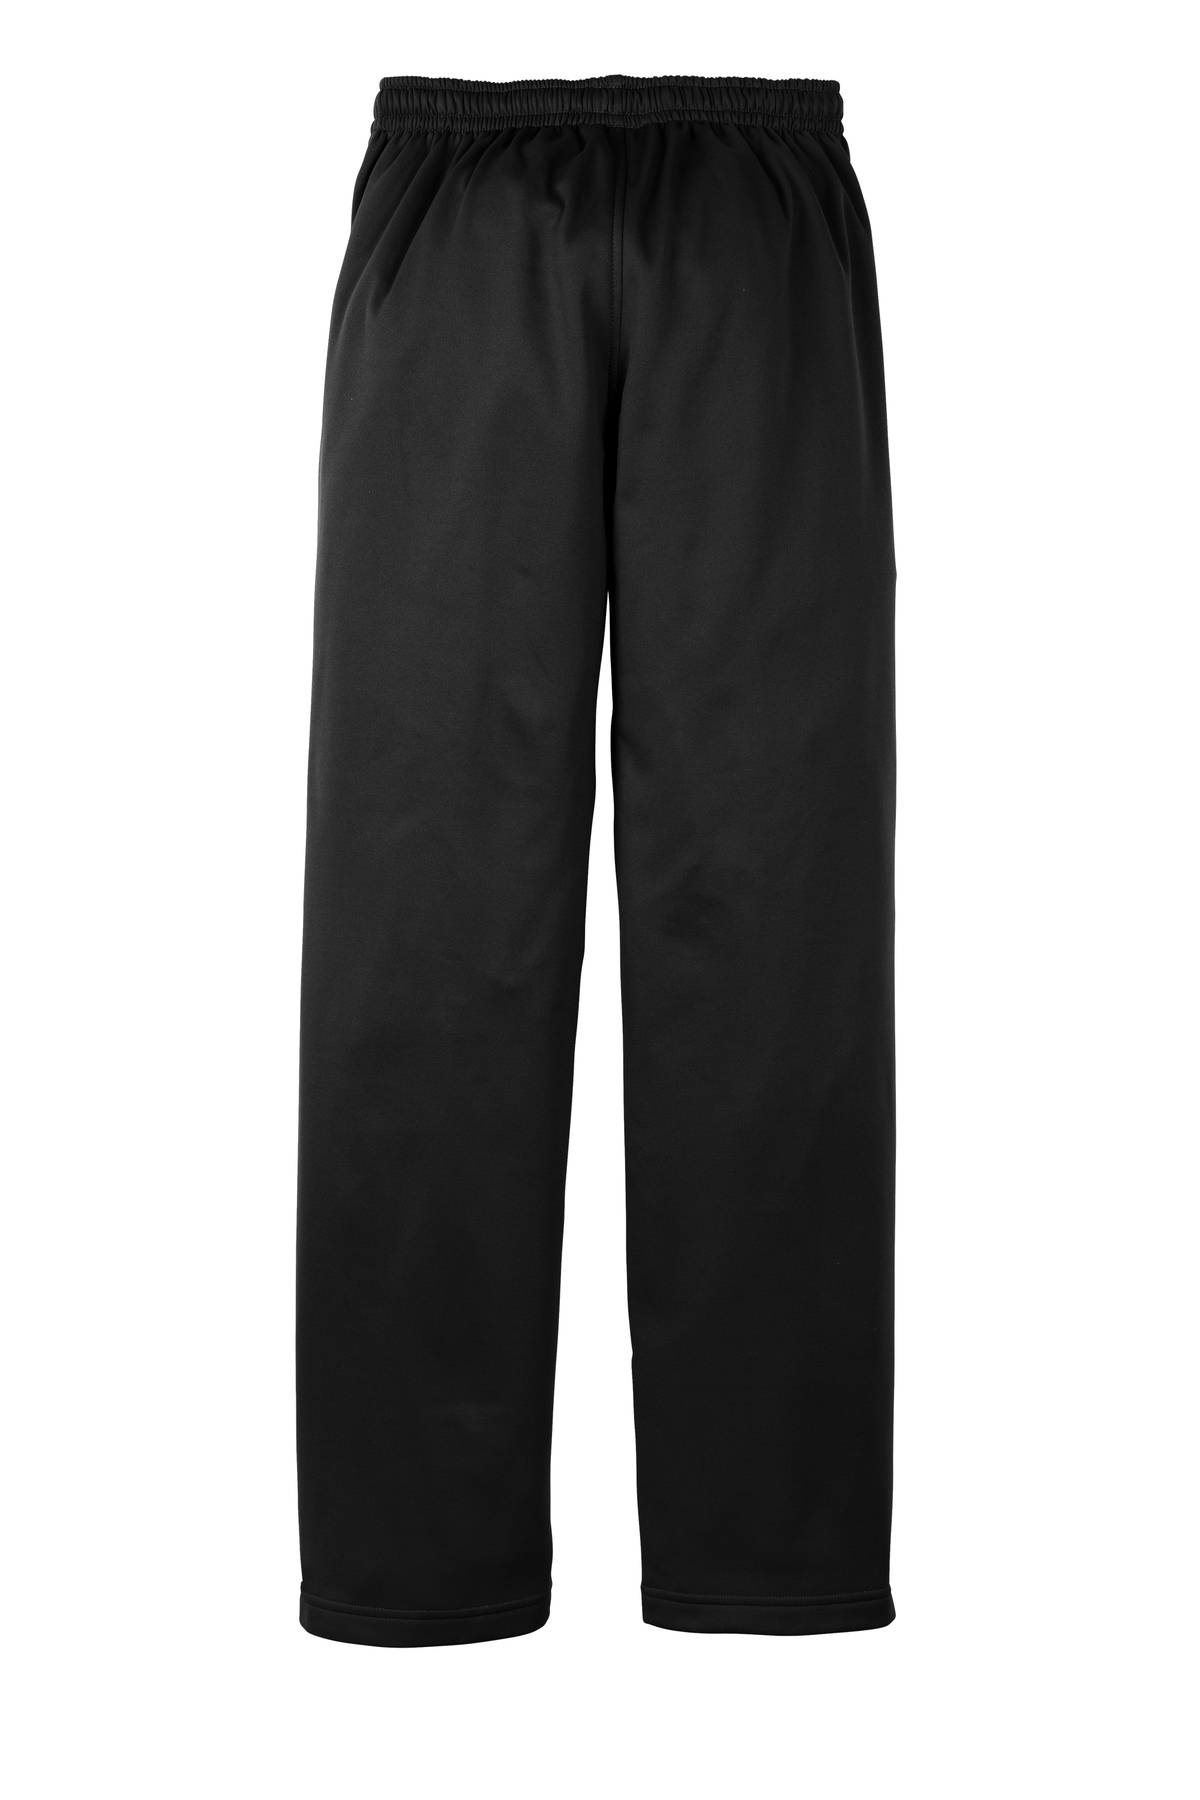 Sport-Tek® Ladies Sport-Wick® 100% Polyester Fleece Pant Style LST237 -  Casual Clothing for Men, Women, Youth, and Children